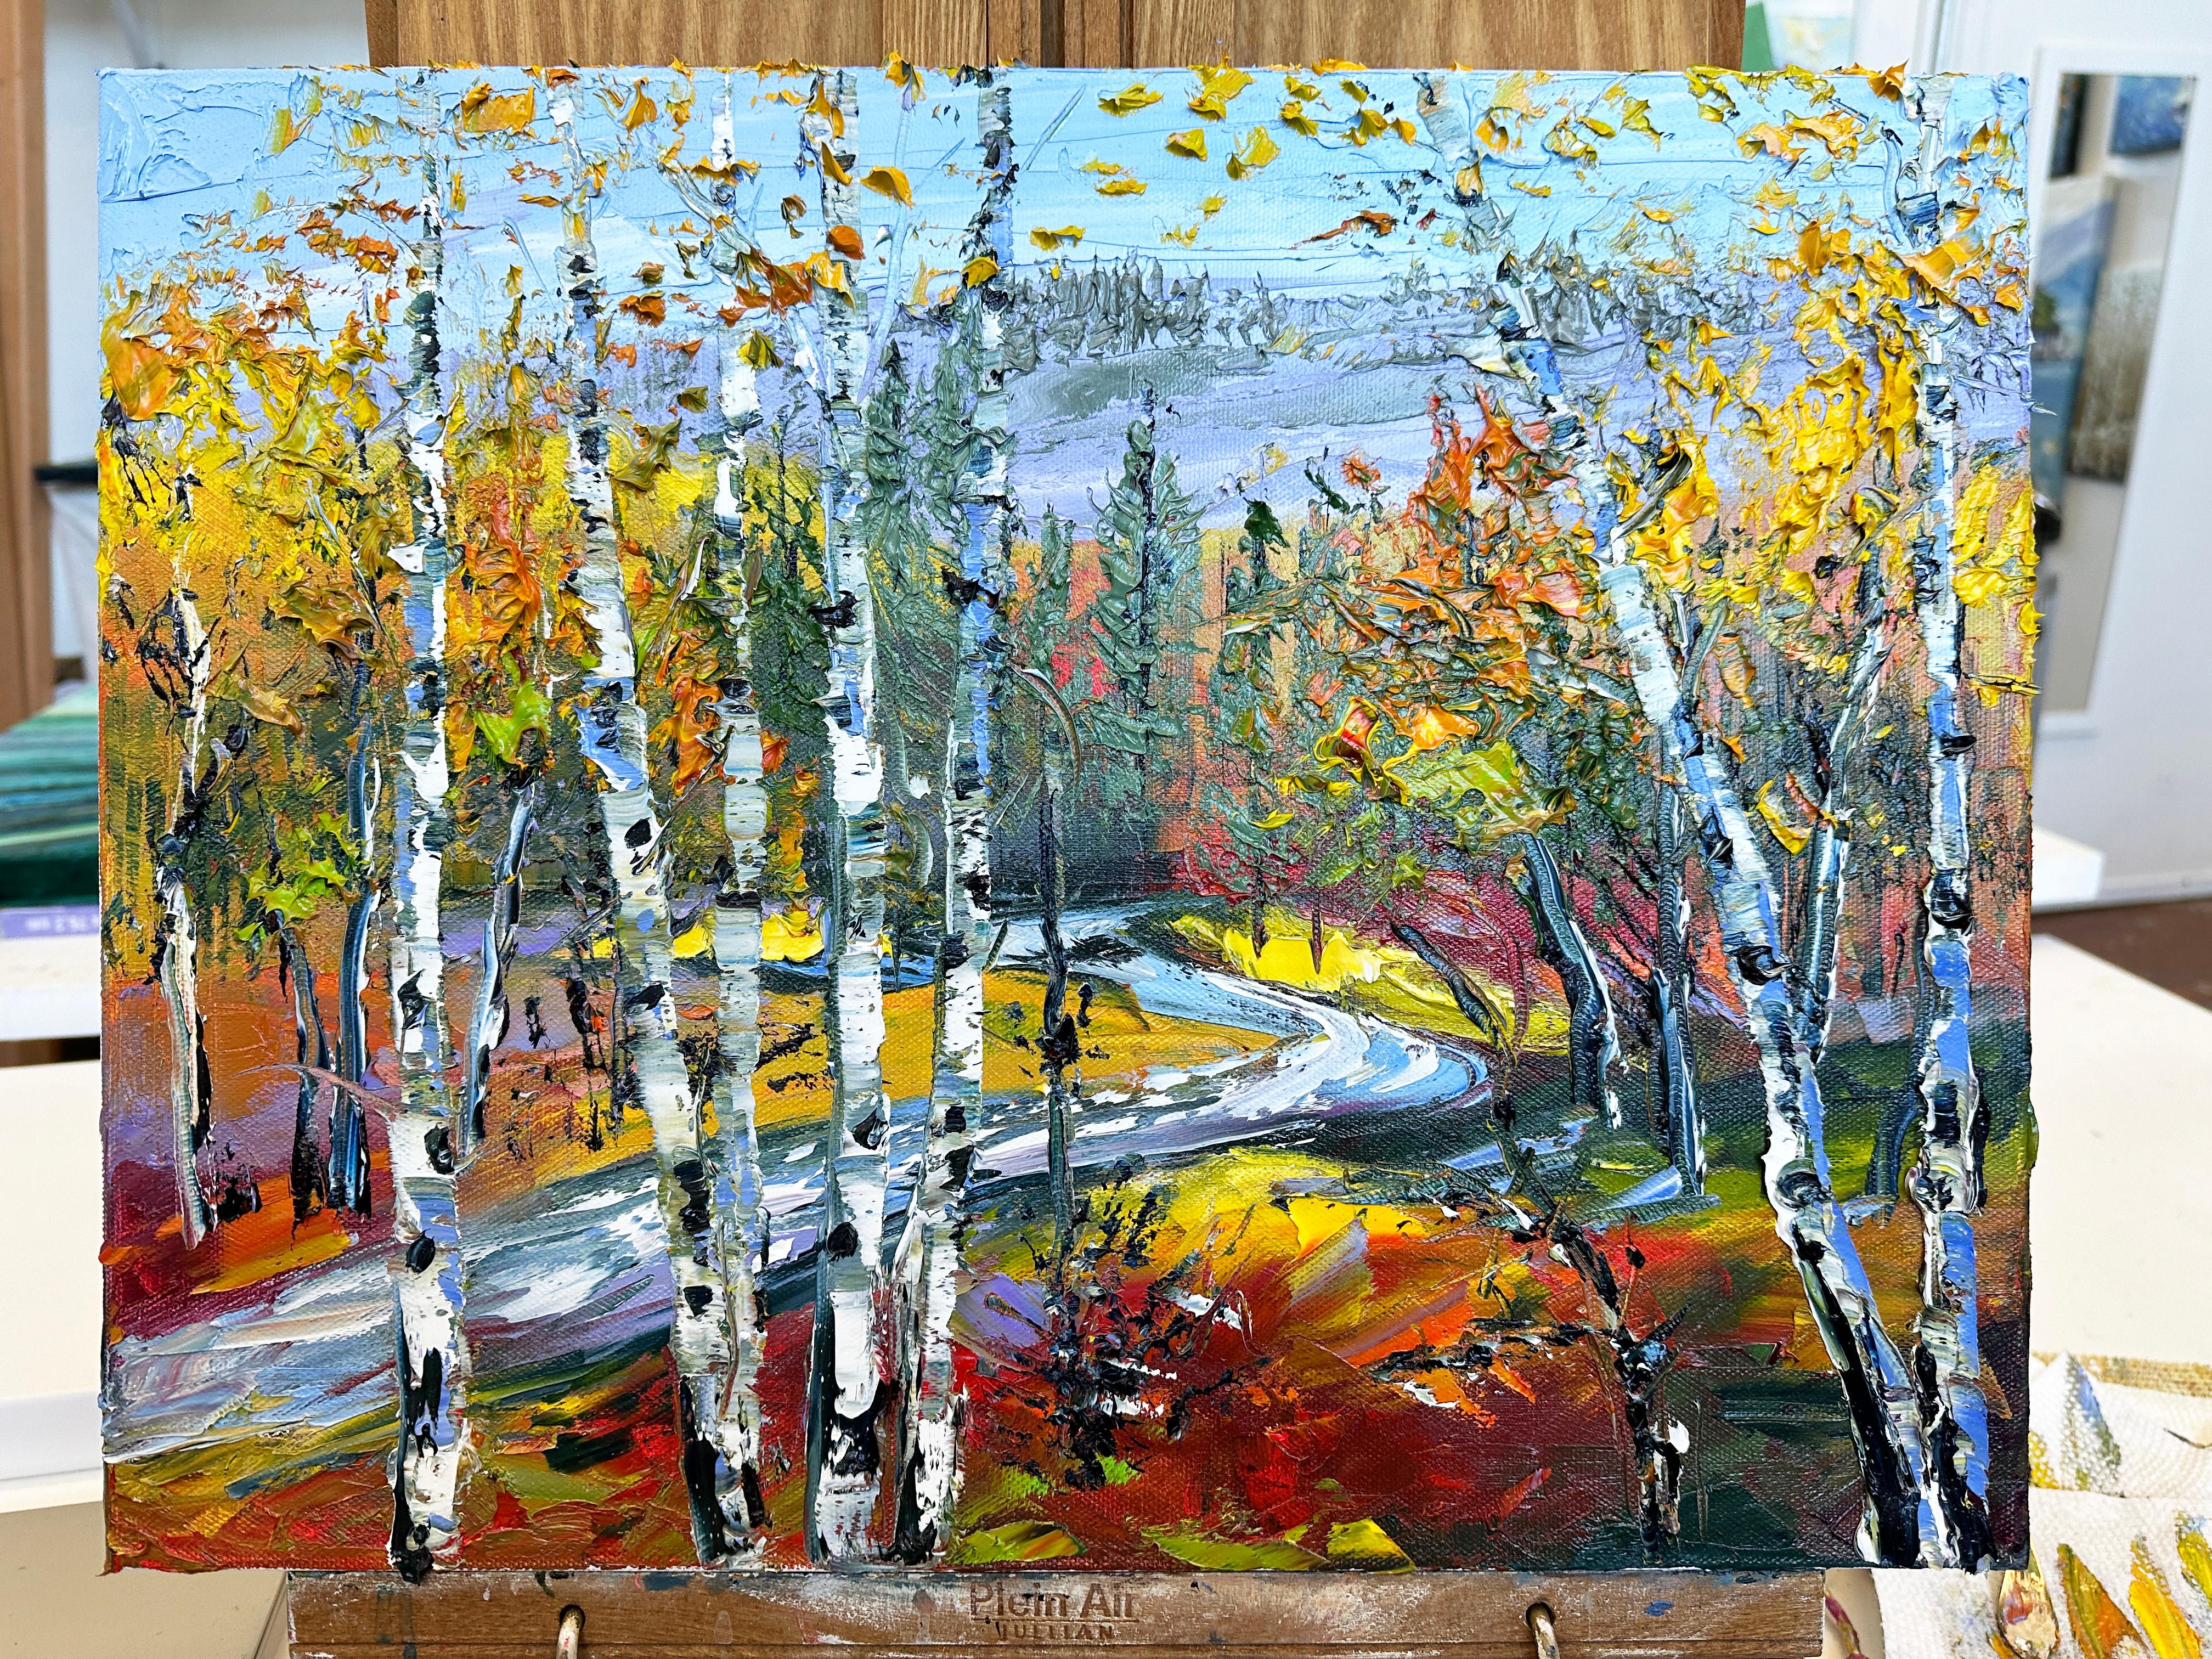 <p>Artist Comments<br>Artist Lisa Elley shows her signature palette knife trees textured with deep impasto strokes. The foliage exhibits subtle movement and richness in colors. Lisa's paint application evokes the serenity of mountain landscapes on a